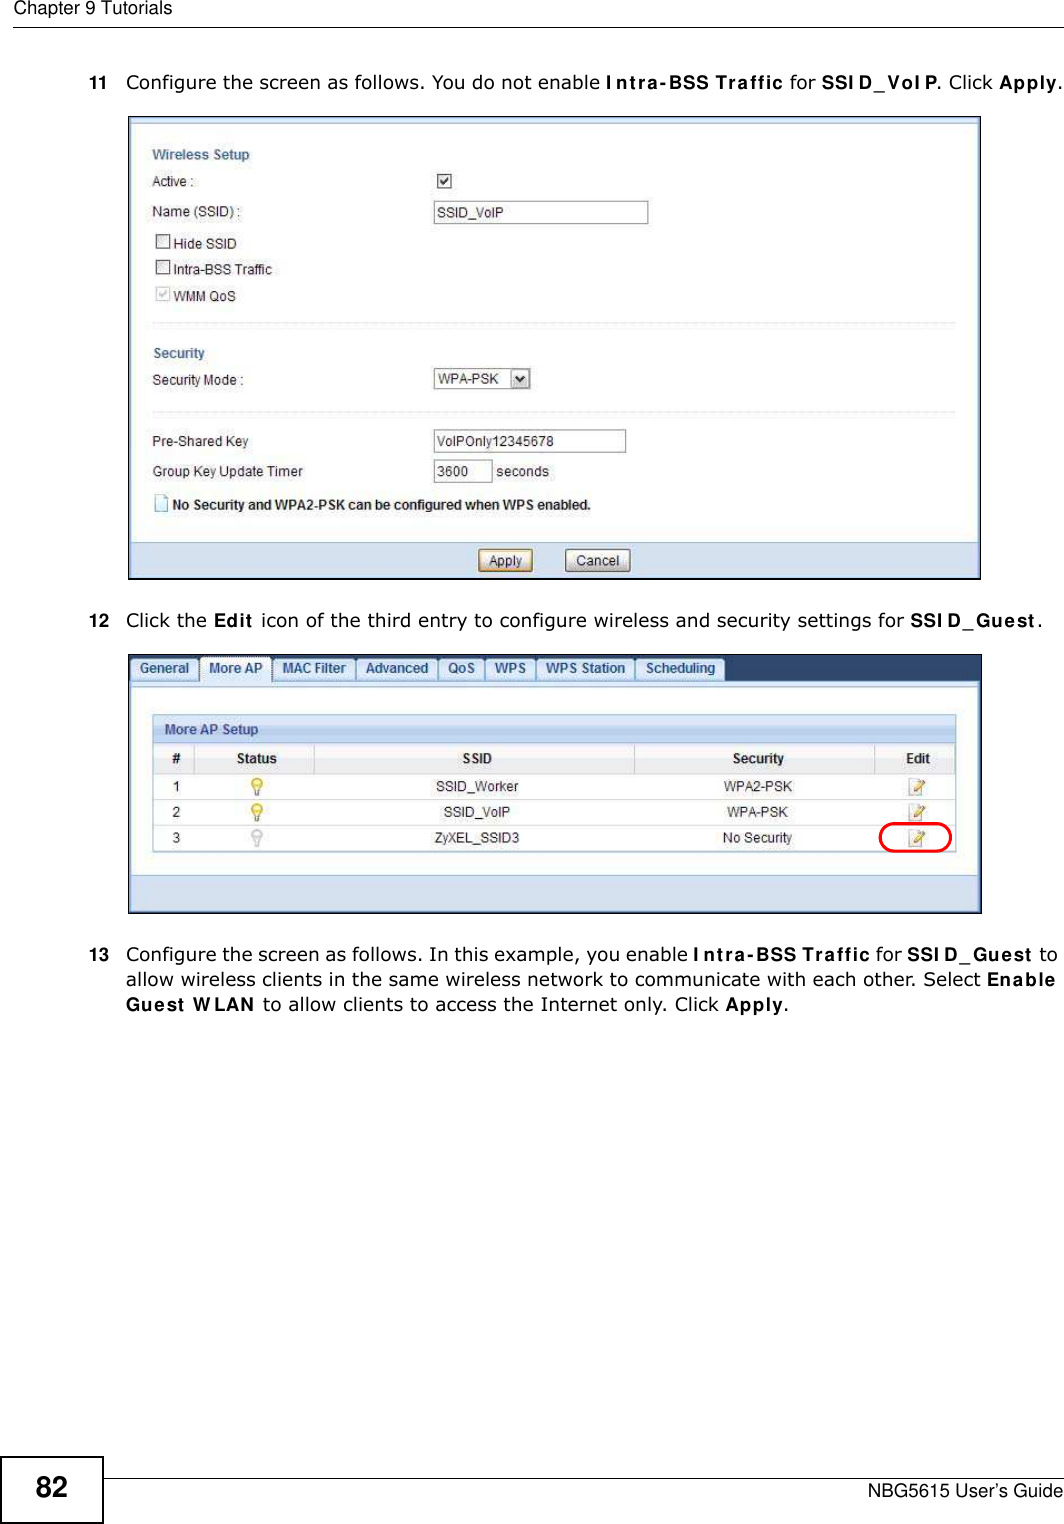 Chapter 9 TutorialsNBG5615 User’s Guide8211 Configure the screen as follows. You do not enable I ntra- BSS Traffic for SSI D_ VoI P. Click Apply.12 Click the Edit icon of the third entry to configure wireless and security settings for SSI D_Guest.13 Configure the screen as follows. In this example, you enable I ntra-BSS Traffic for SSI D_ Guest to allow wireless clients in the same wireless network to communicate with each other. Select Enable Guest W LAN to allow clients to access the Internet only. Click Apply.